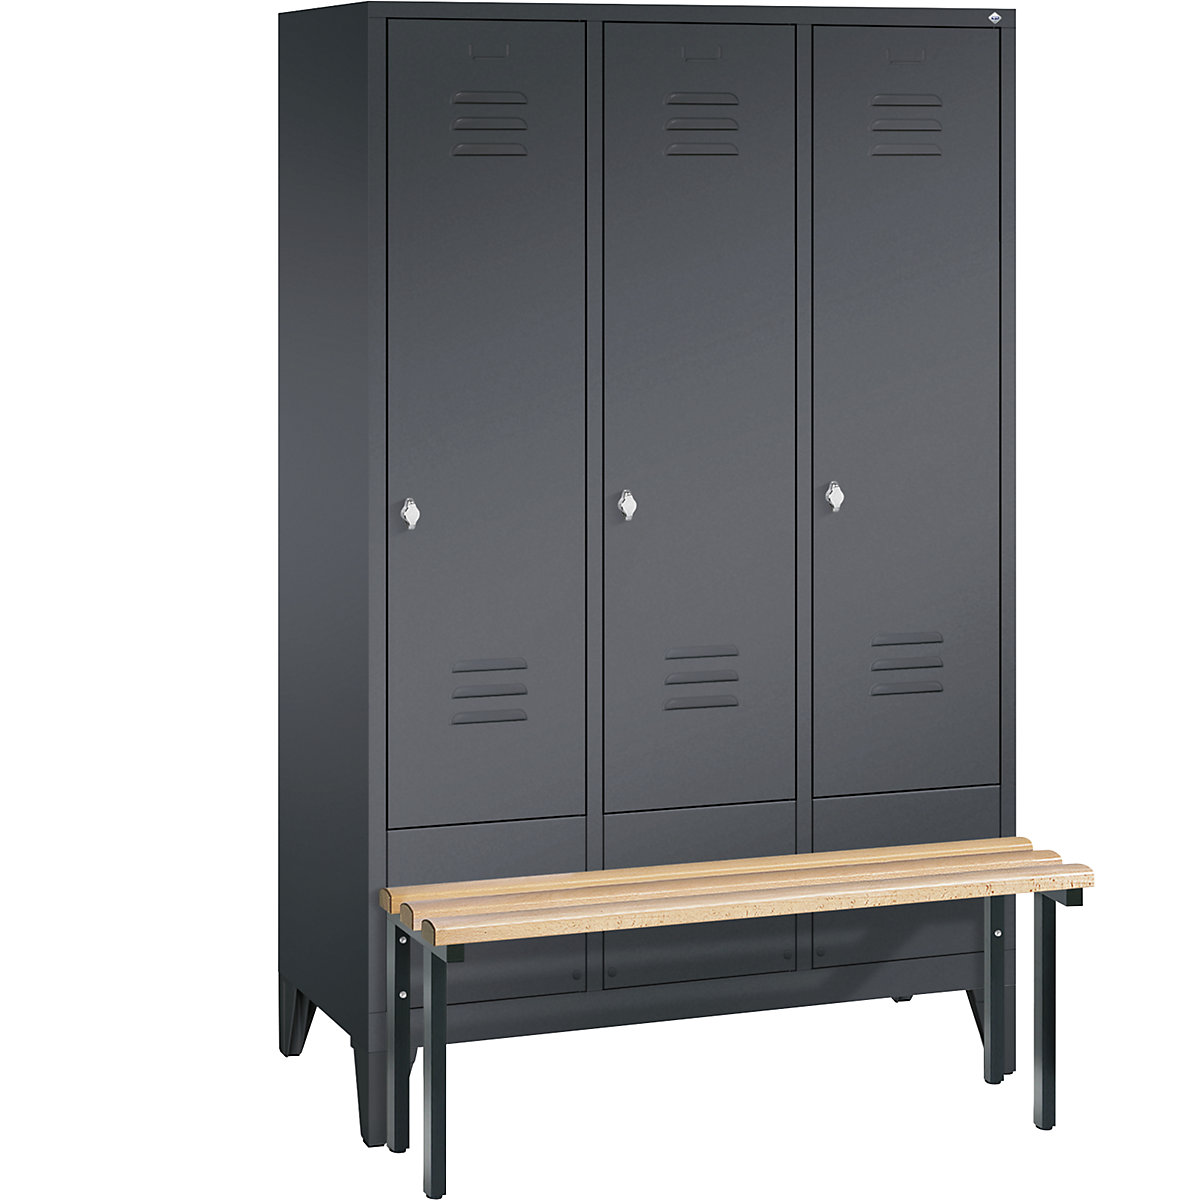 CLASSIC cloakroom locker with bench mounted in front – C+P, 3 compartments, compartment width 400 mm, black grey-5